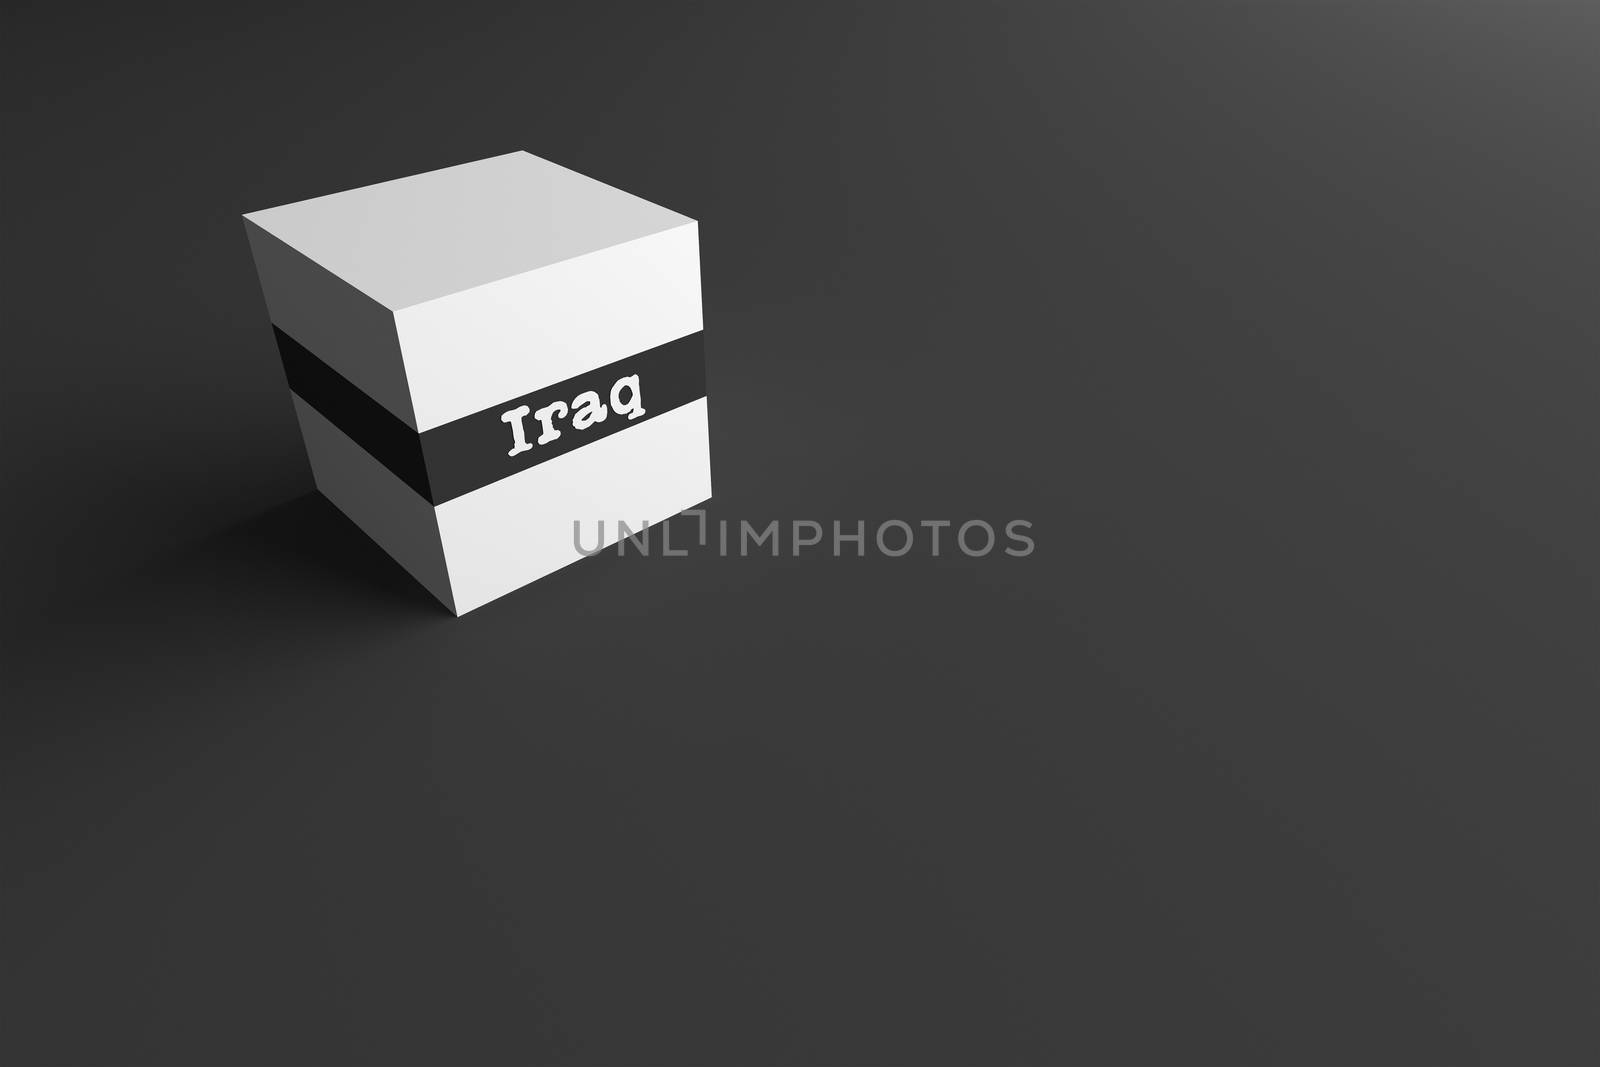 3D RENDERING WORD Iraq WRITTEN ON WHITE CUBE WITH BLACK PLAIN BACKGROUND